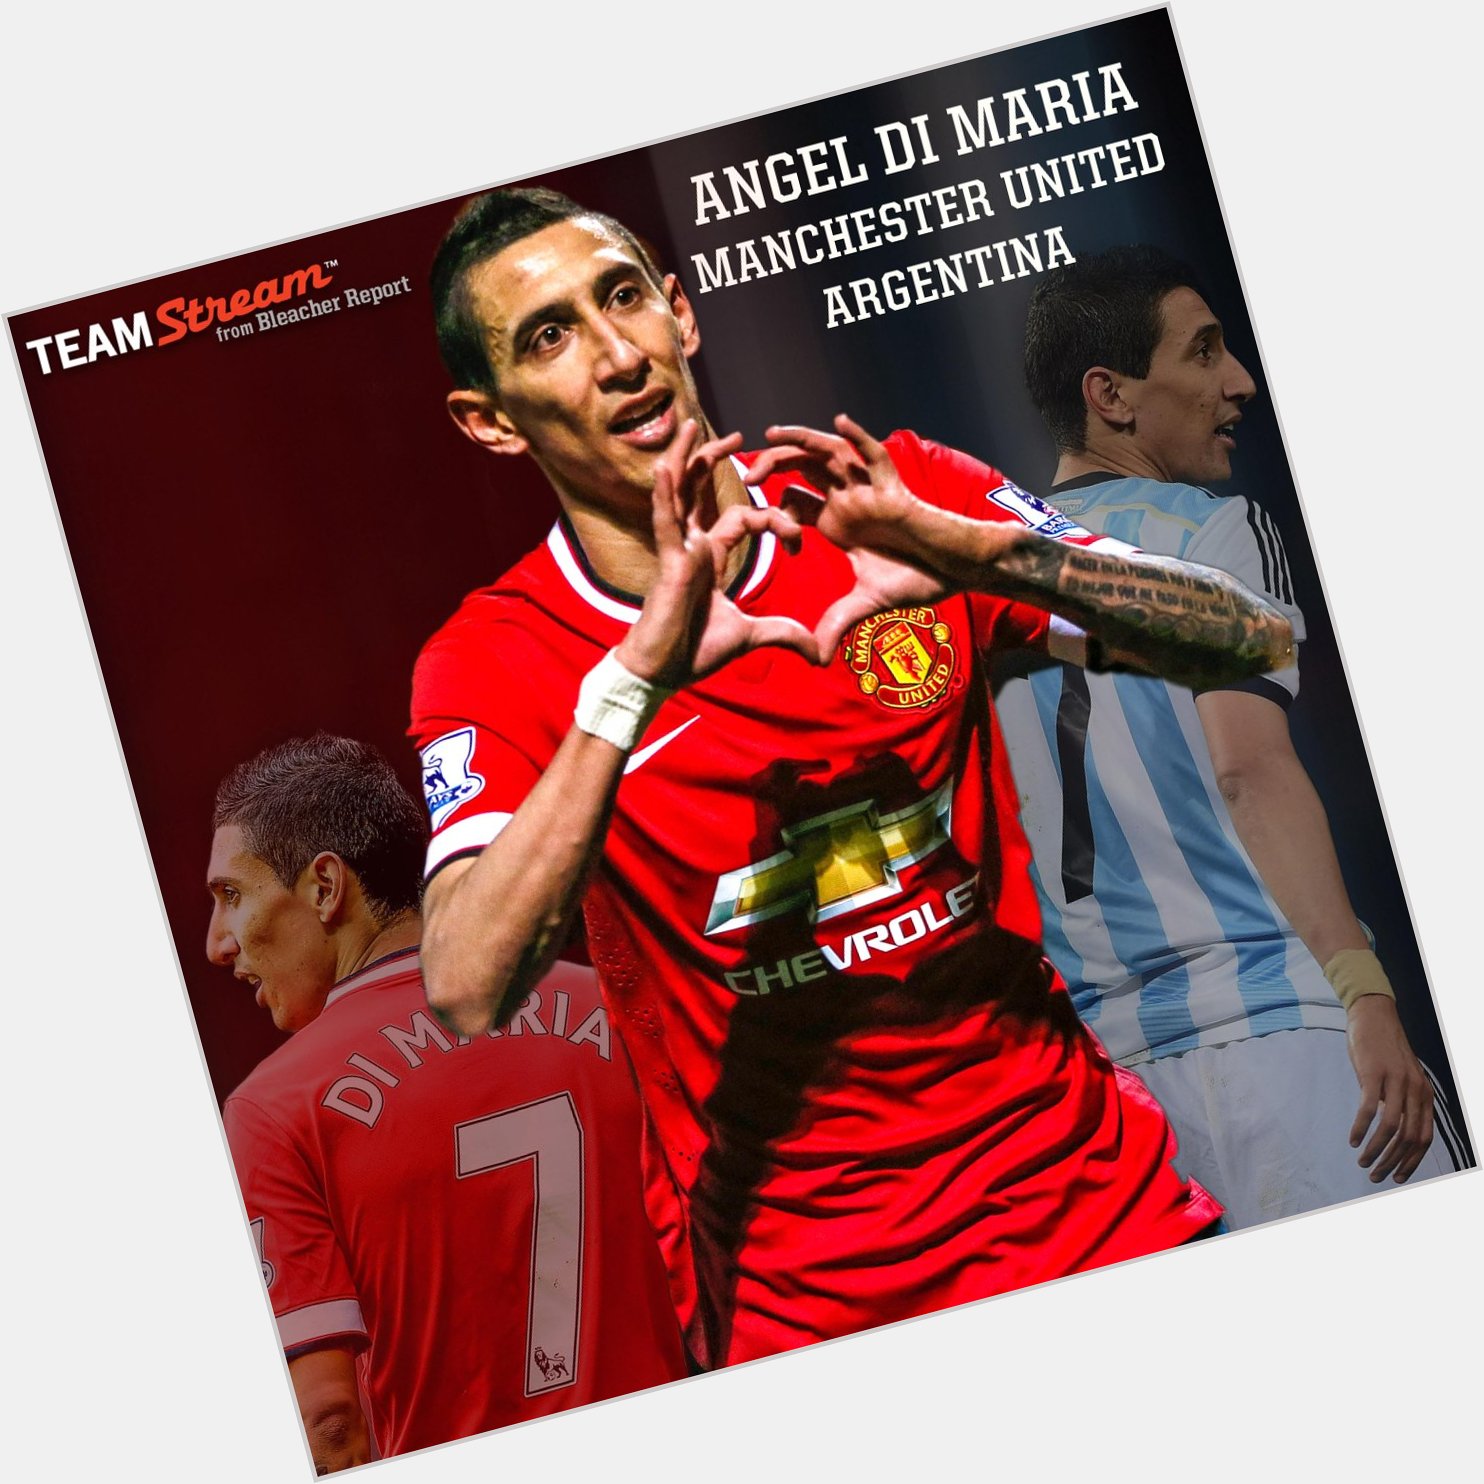   Happy 27th birthday Angel Di Maria! looks like dobby from Harry potter on crack